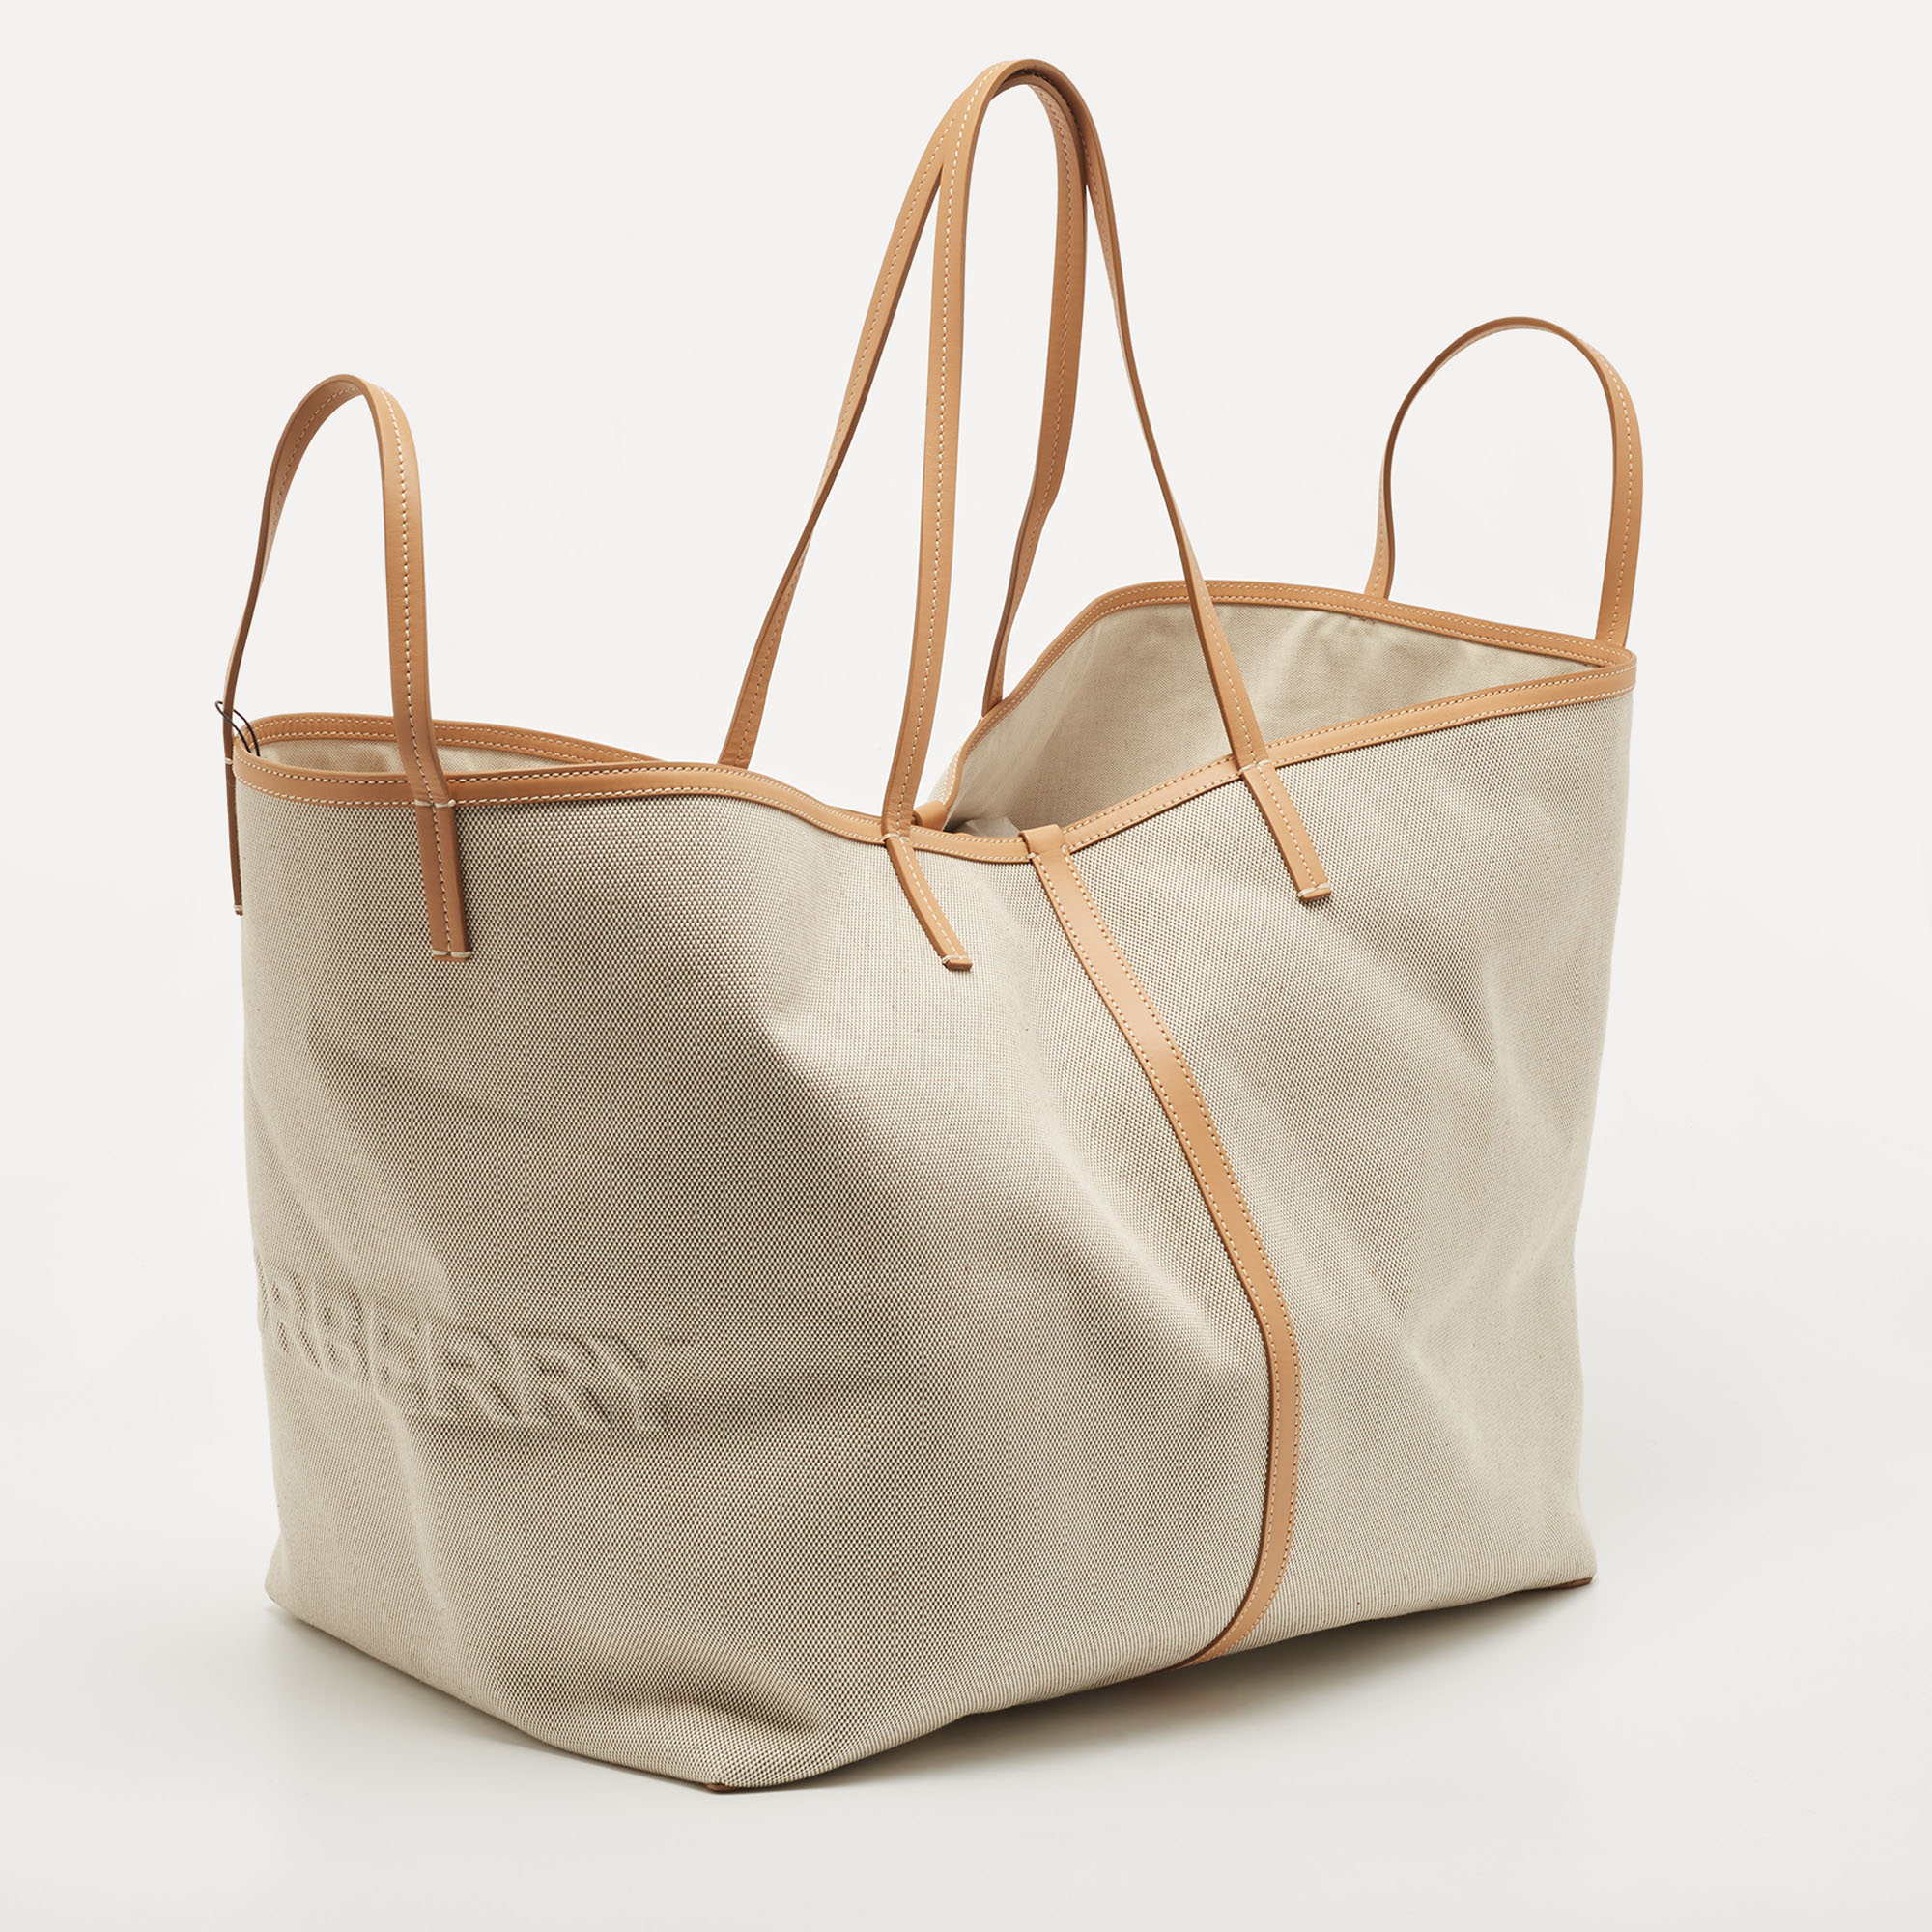 Burberry Natural/Beige Canvas And Leather XL Beach Tote